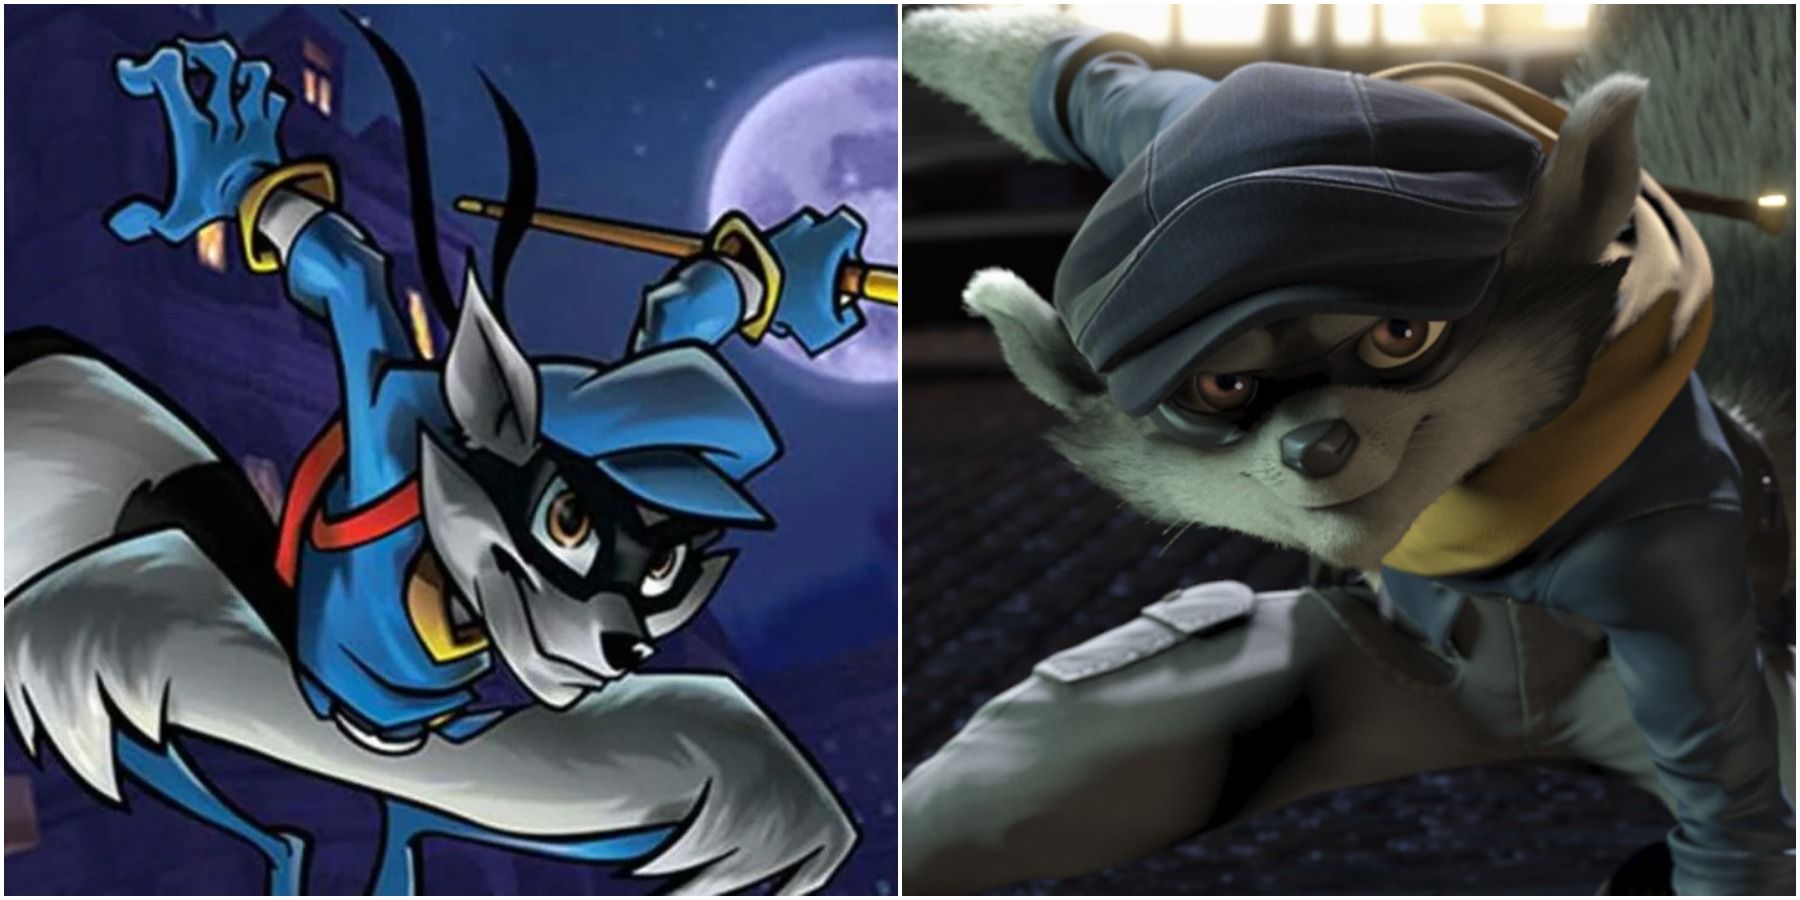 Sly in Sly Cooper and the Thievius Raccoonus and the Sly Cooper Movie